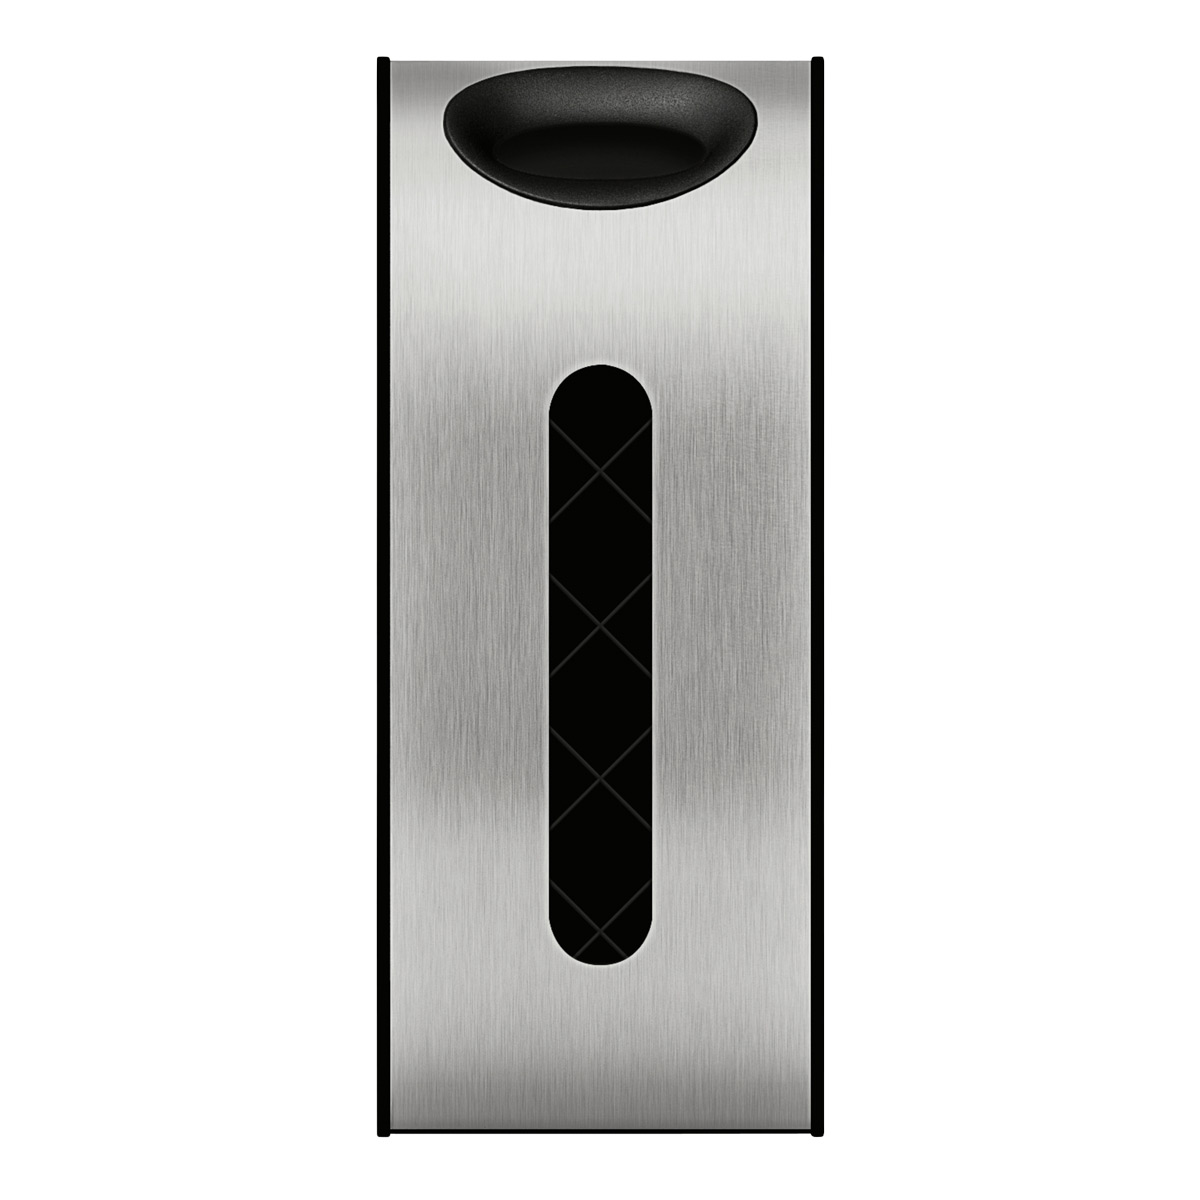 simplehuman KT1161 Brushed Stainless Steel Tension Arm Paper Towel Holder